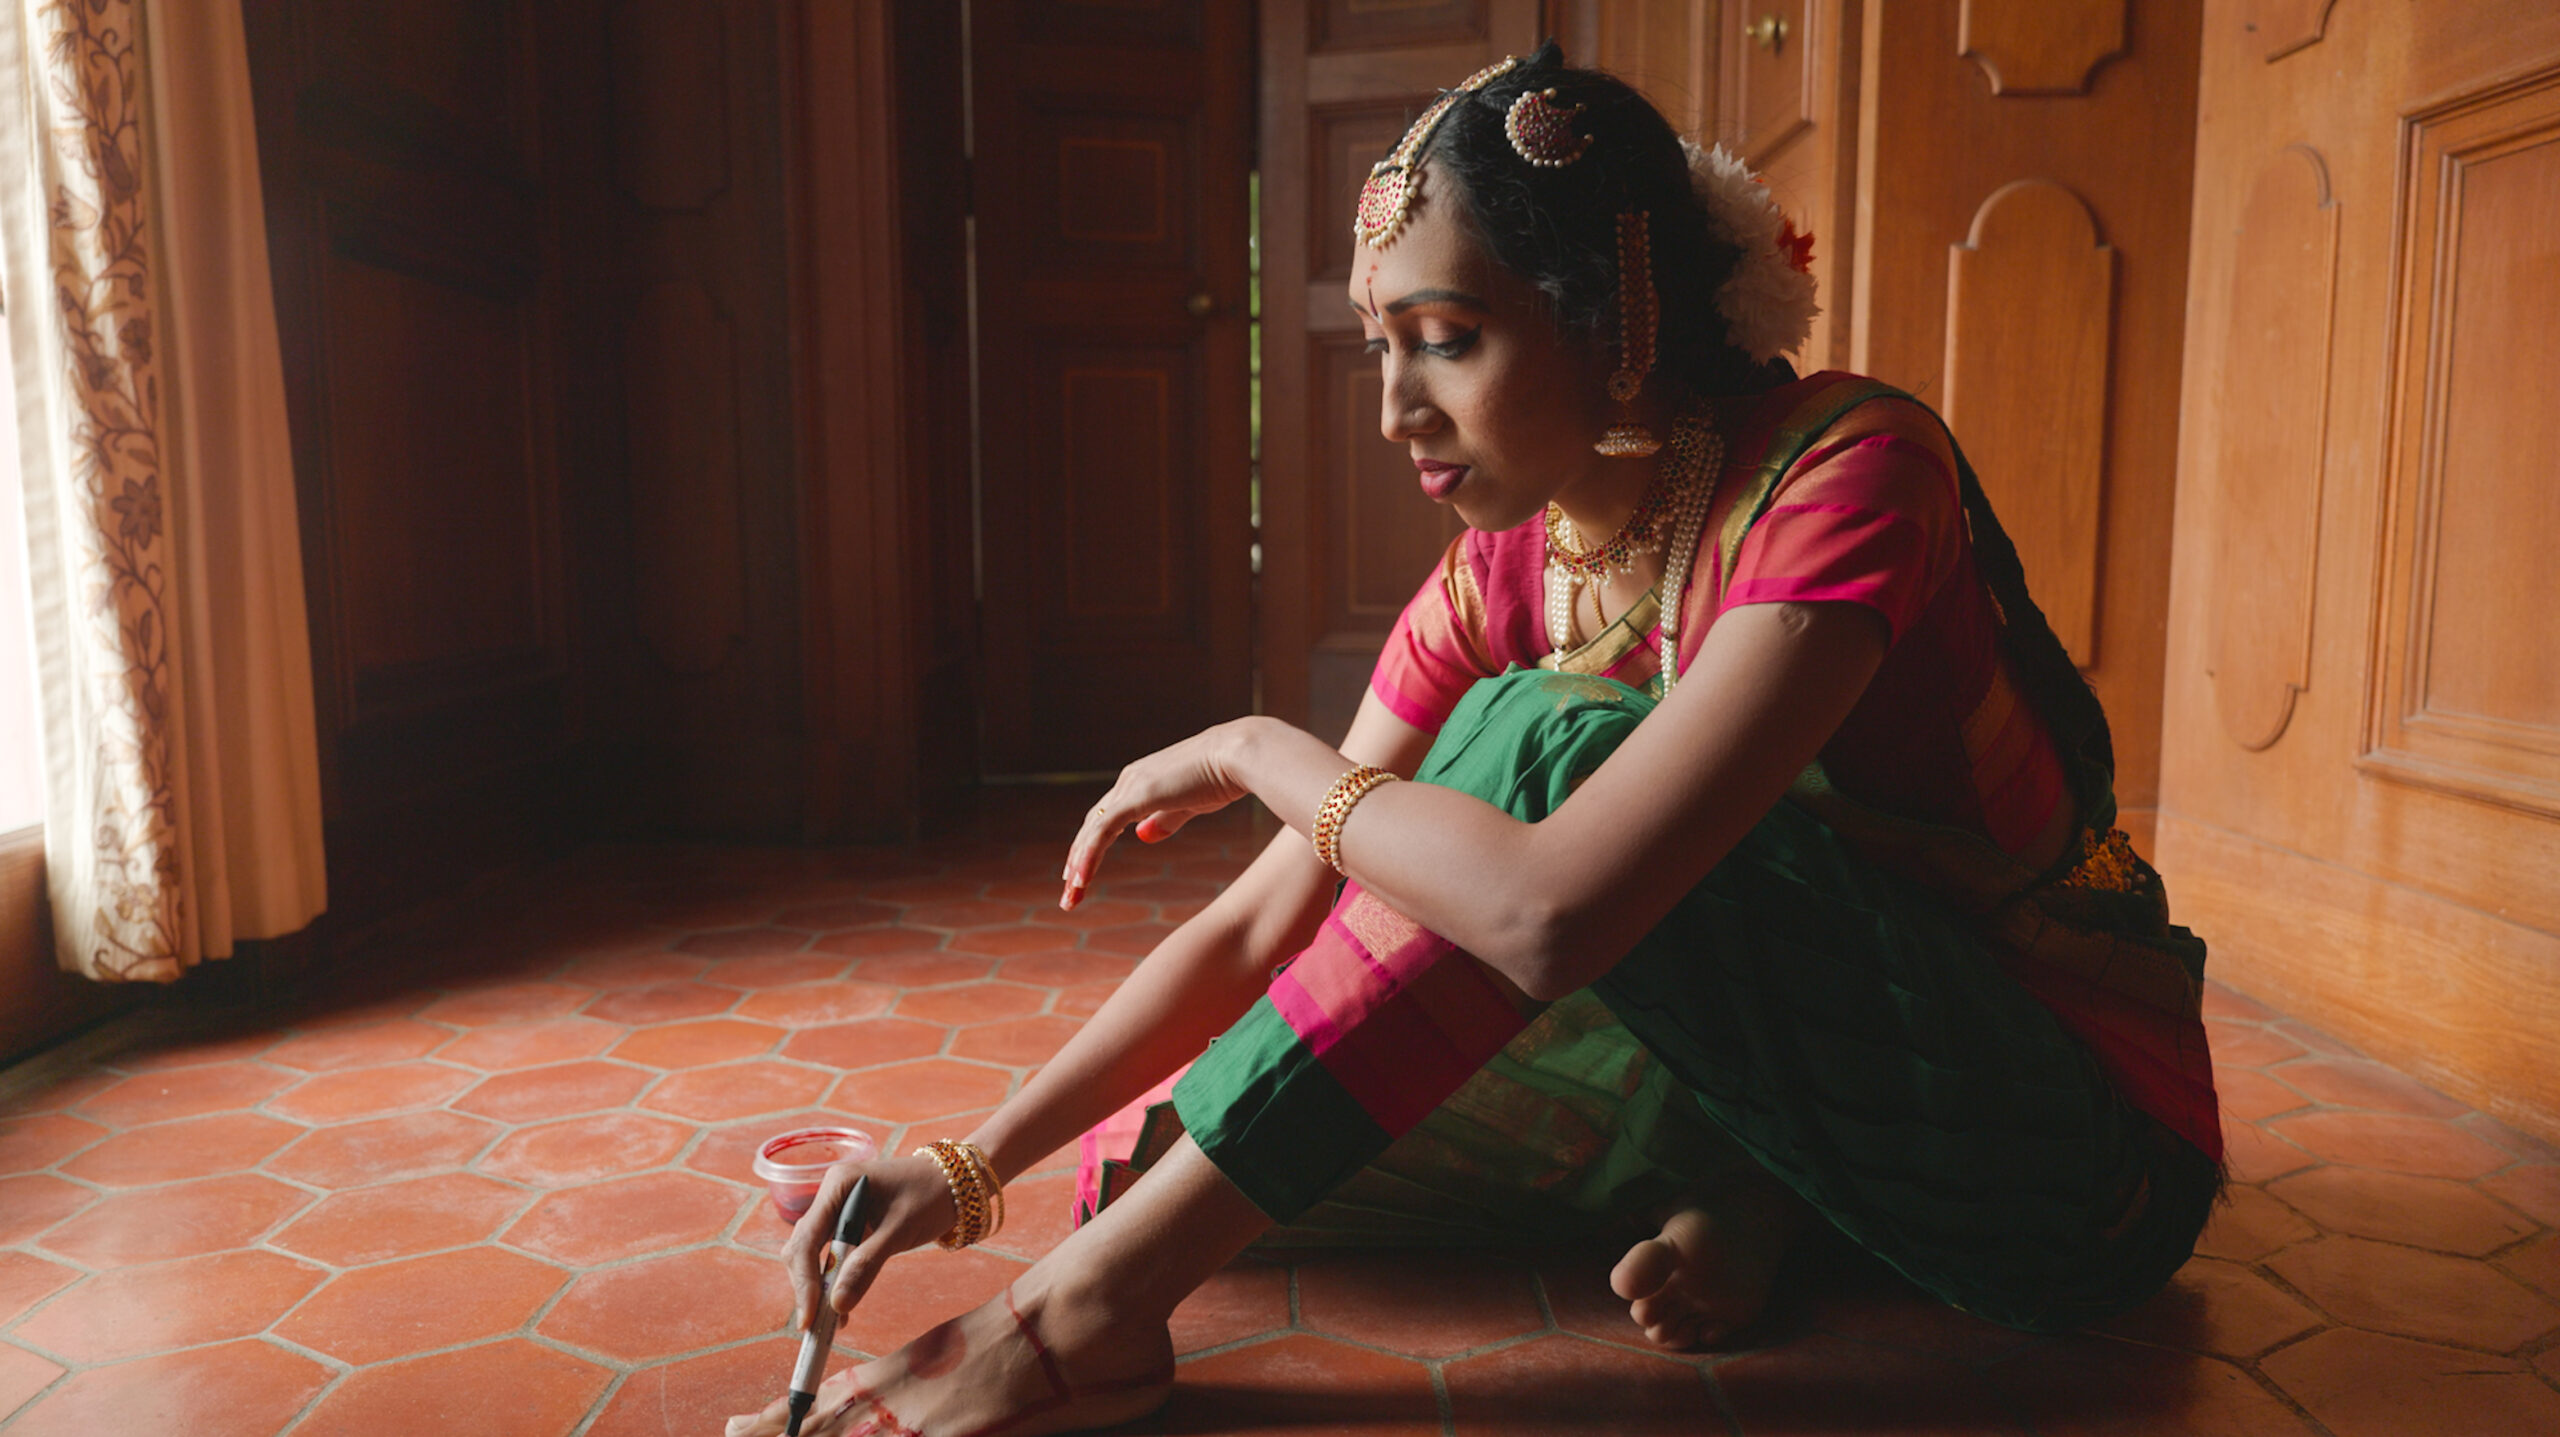 A woman prepares to perform a song and dance